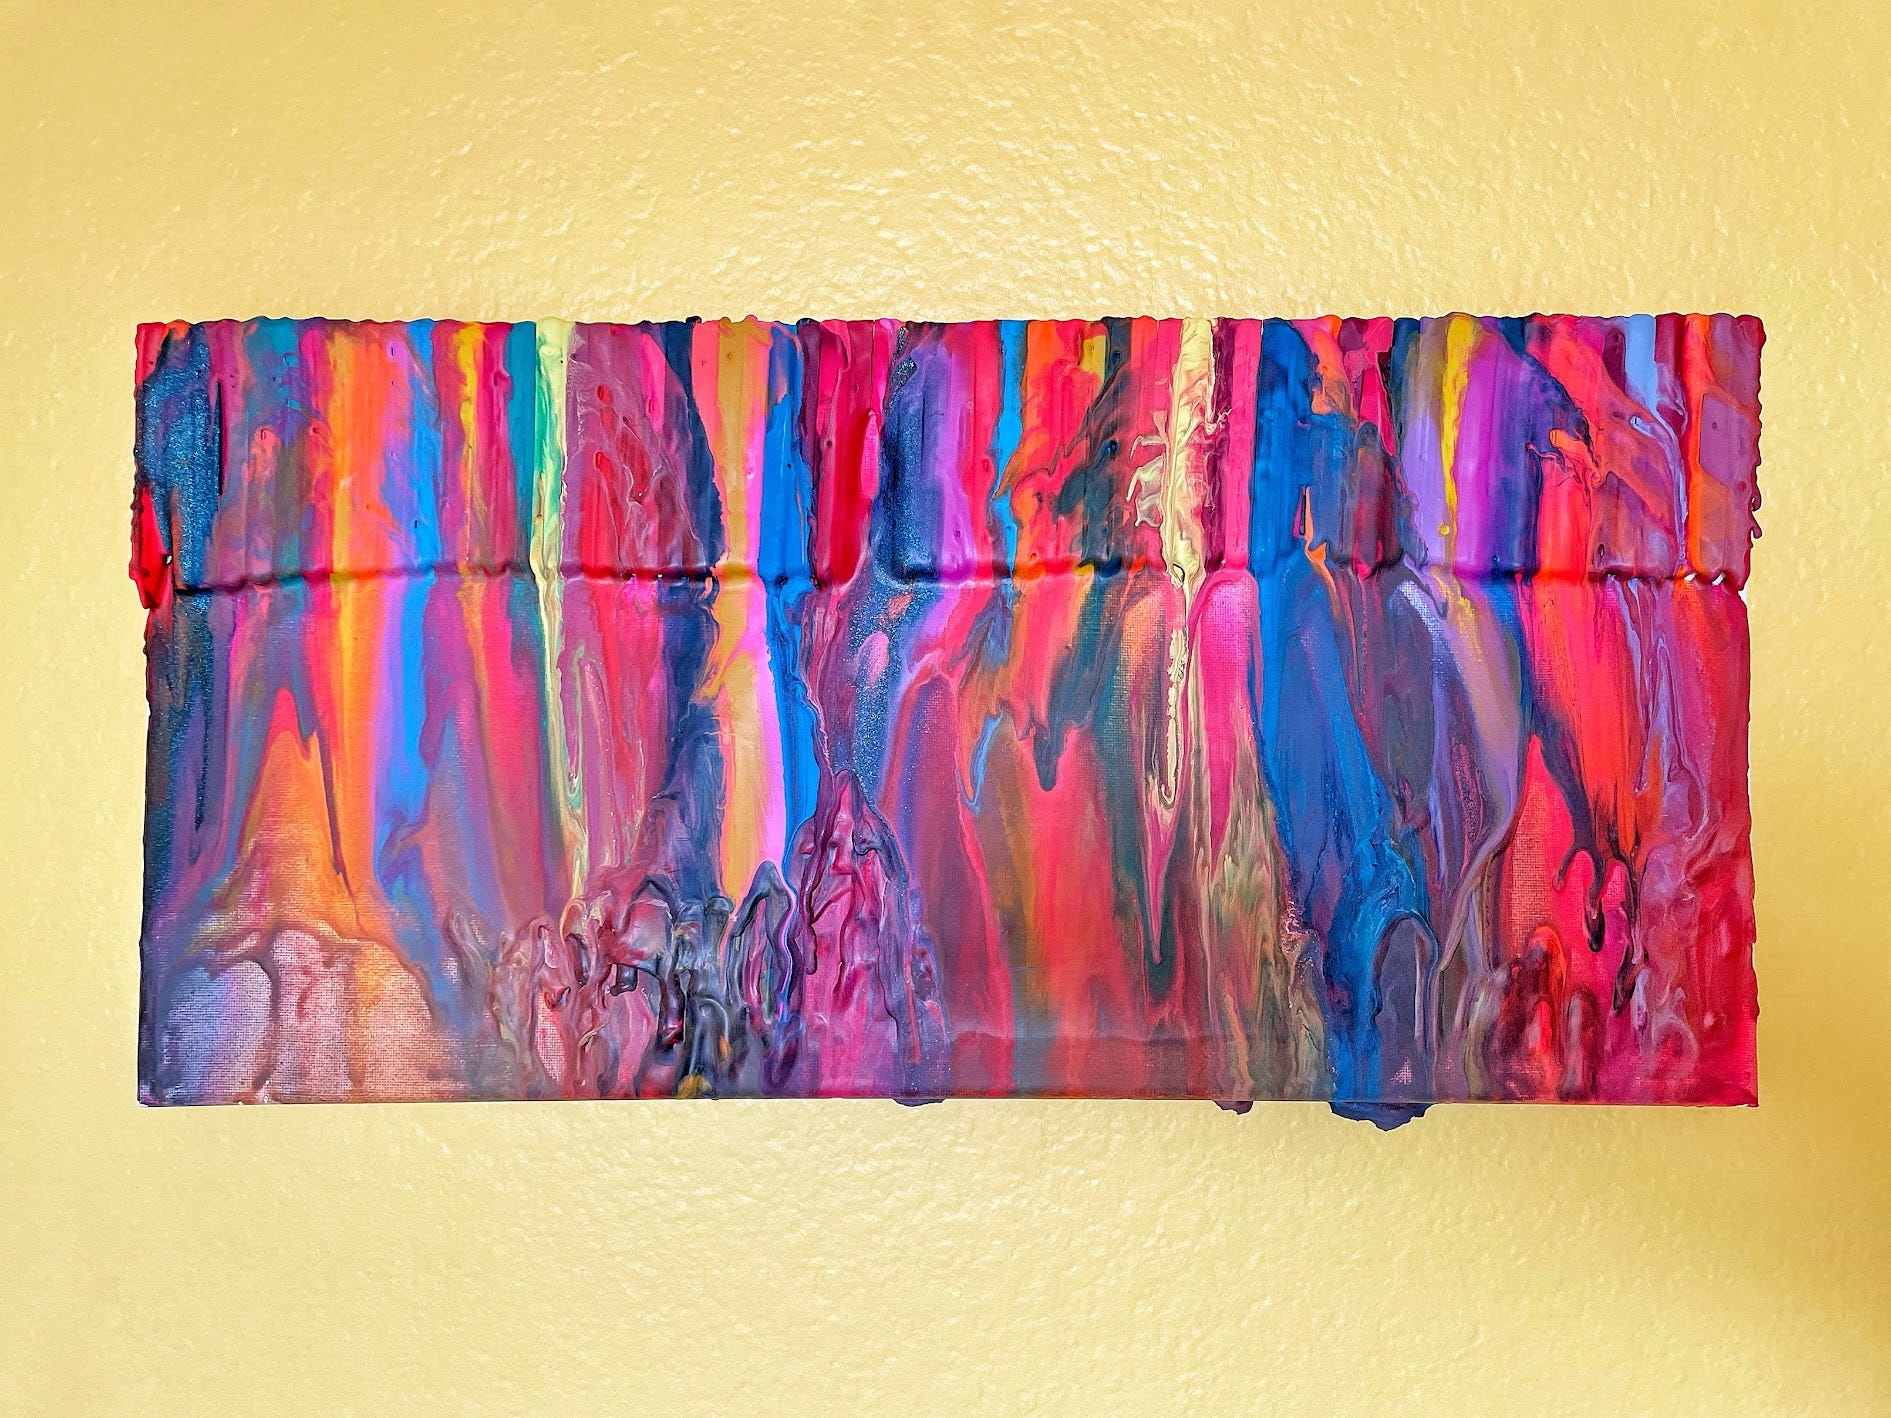 Create Your Own Melted Crayon Art! - Momgineering the Future ®